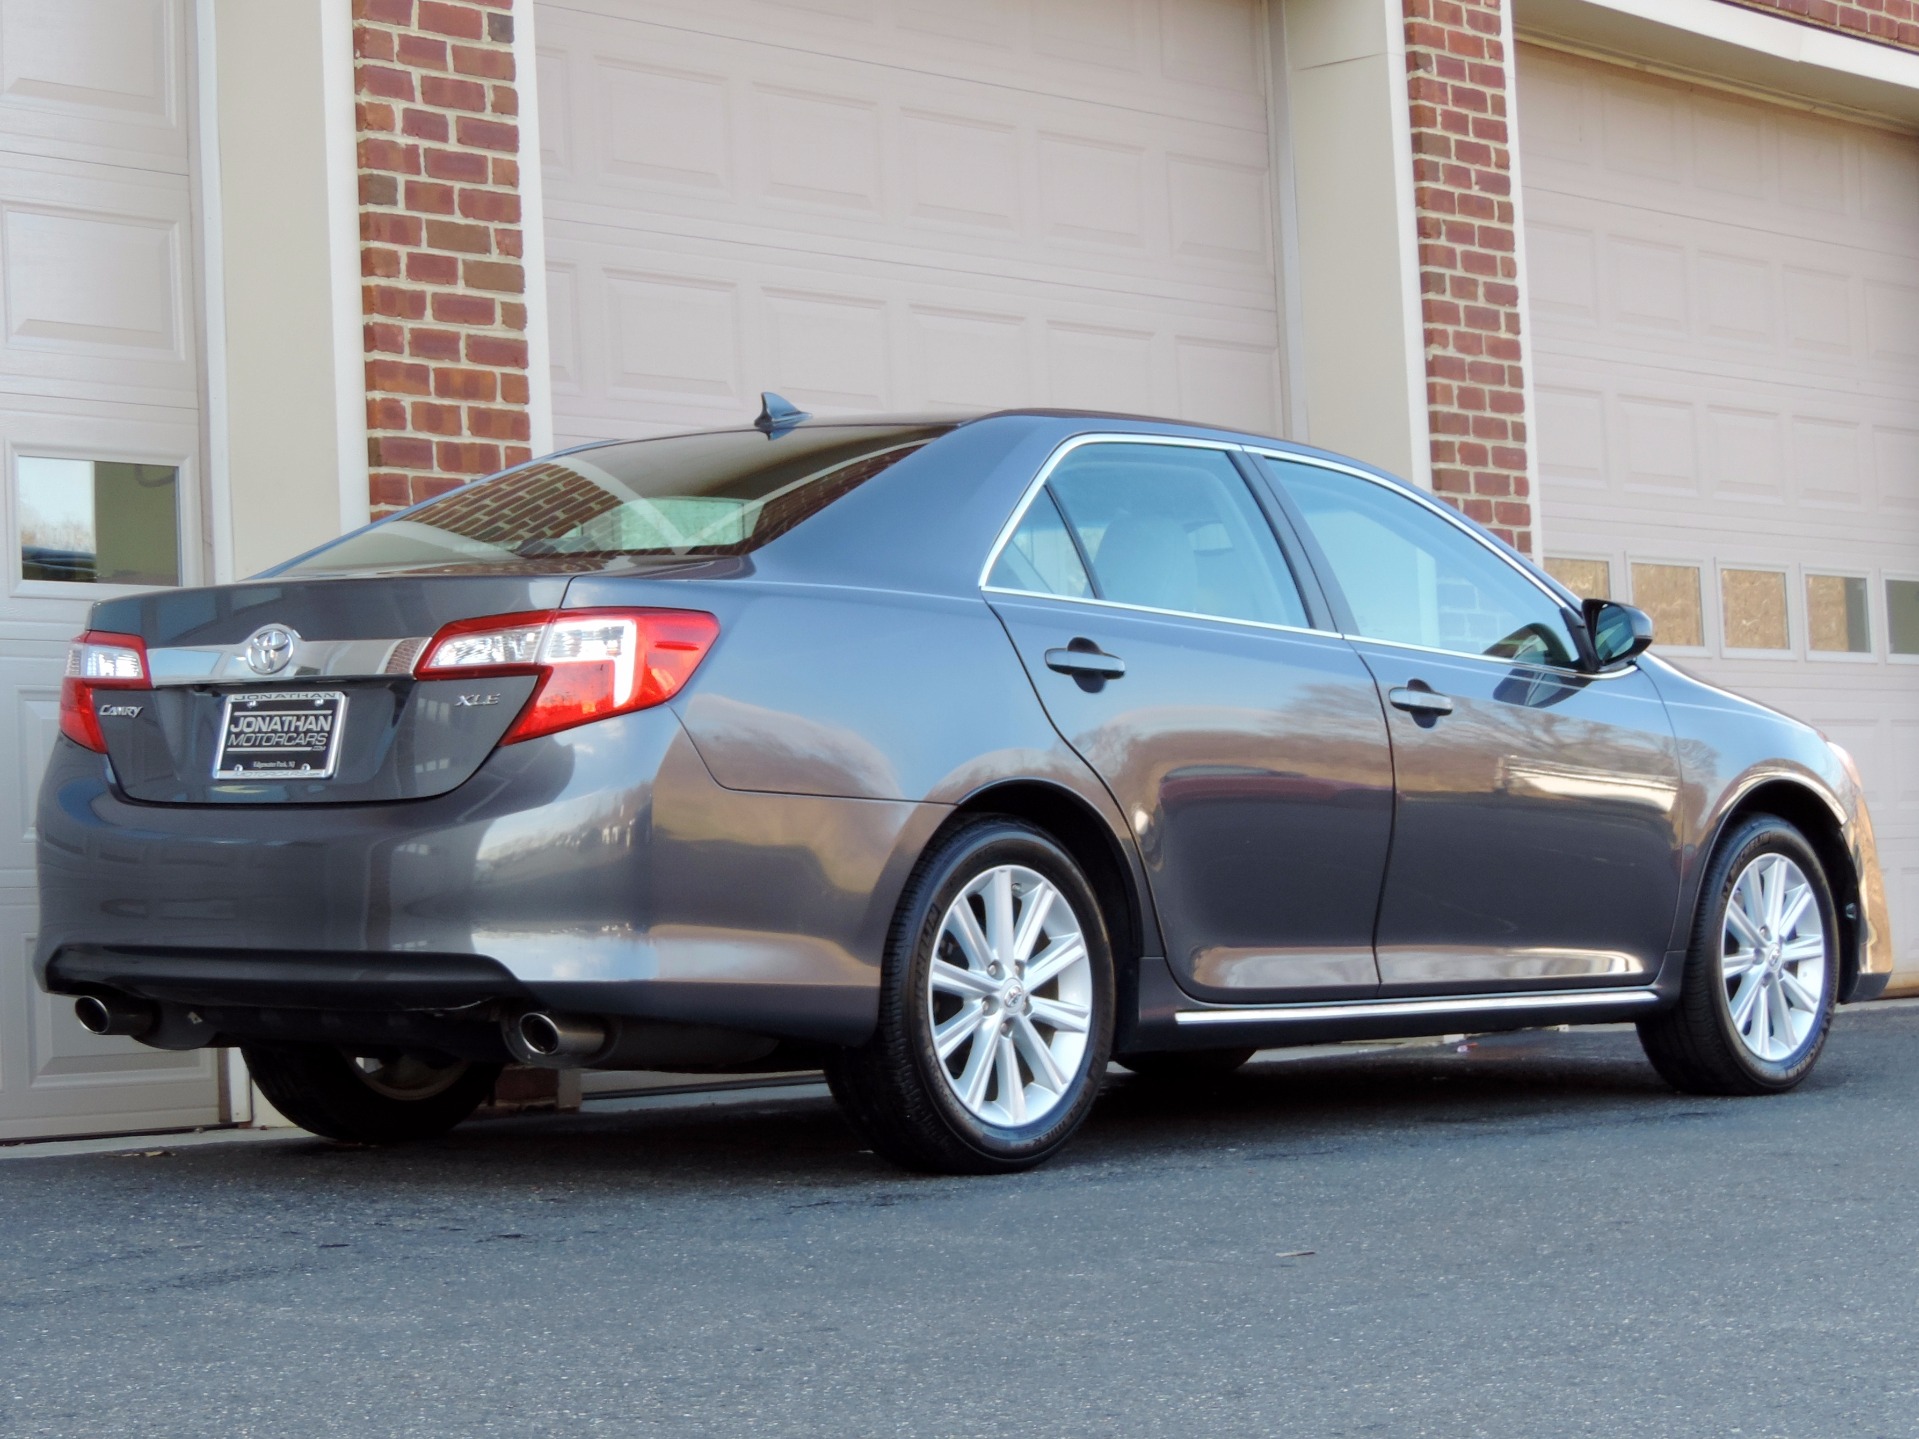 2012 Toyota Camry XLE V6 Stock # 509521 for sale near Edgewater Park ...